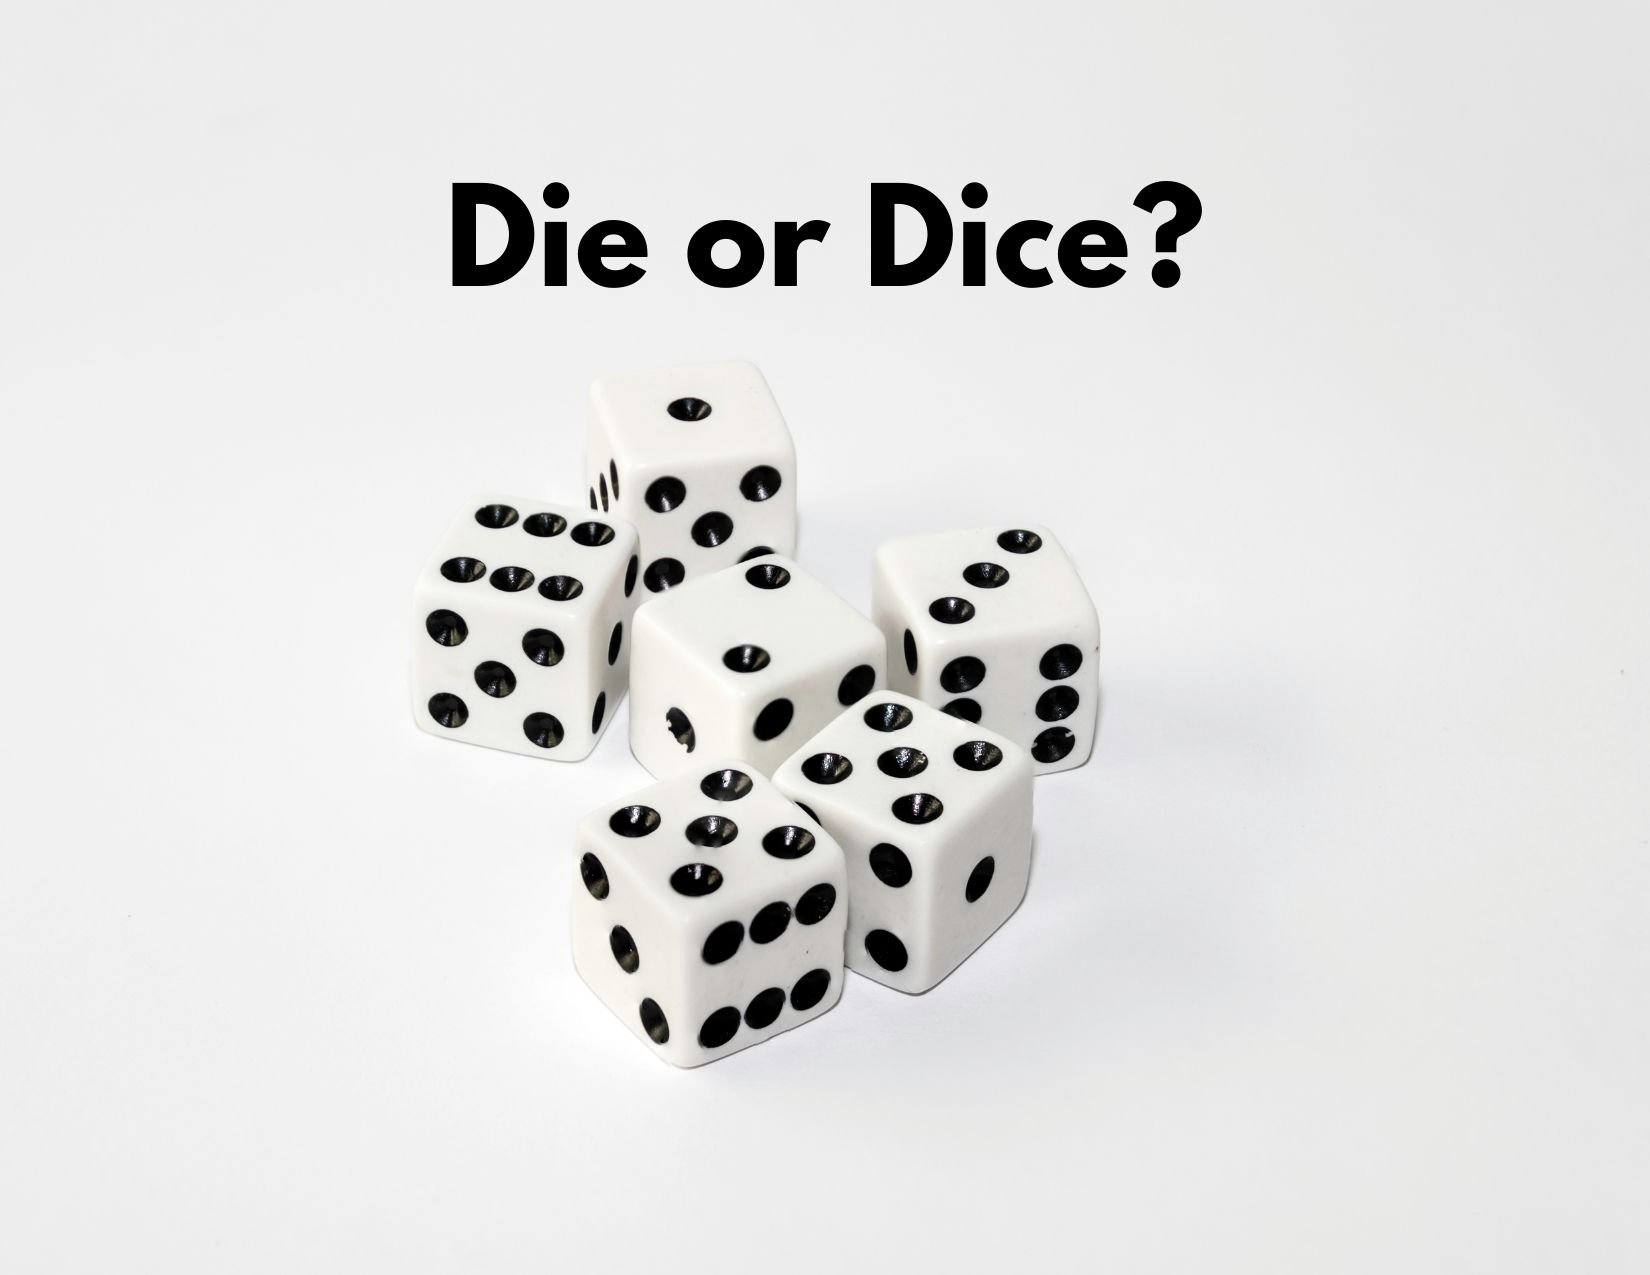 A picture of dice with the words 